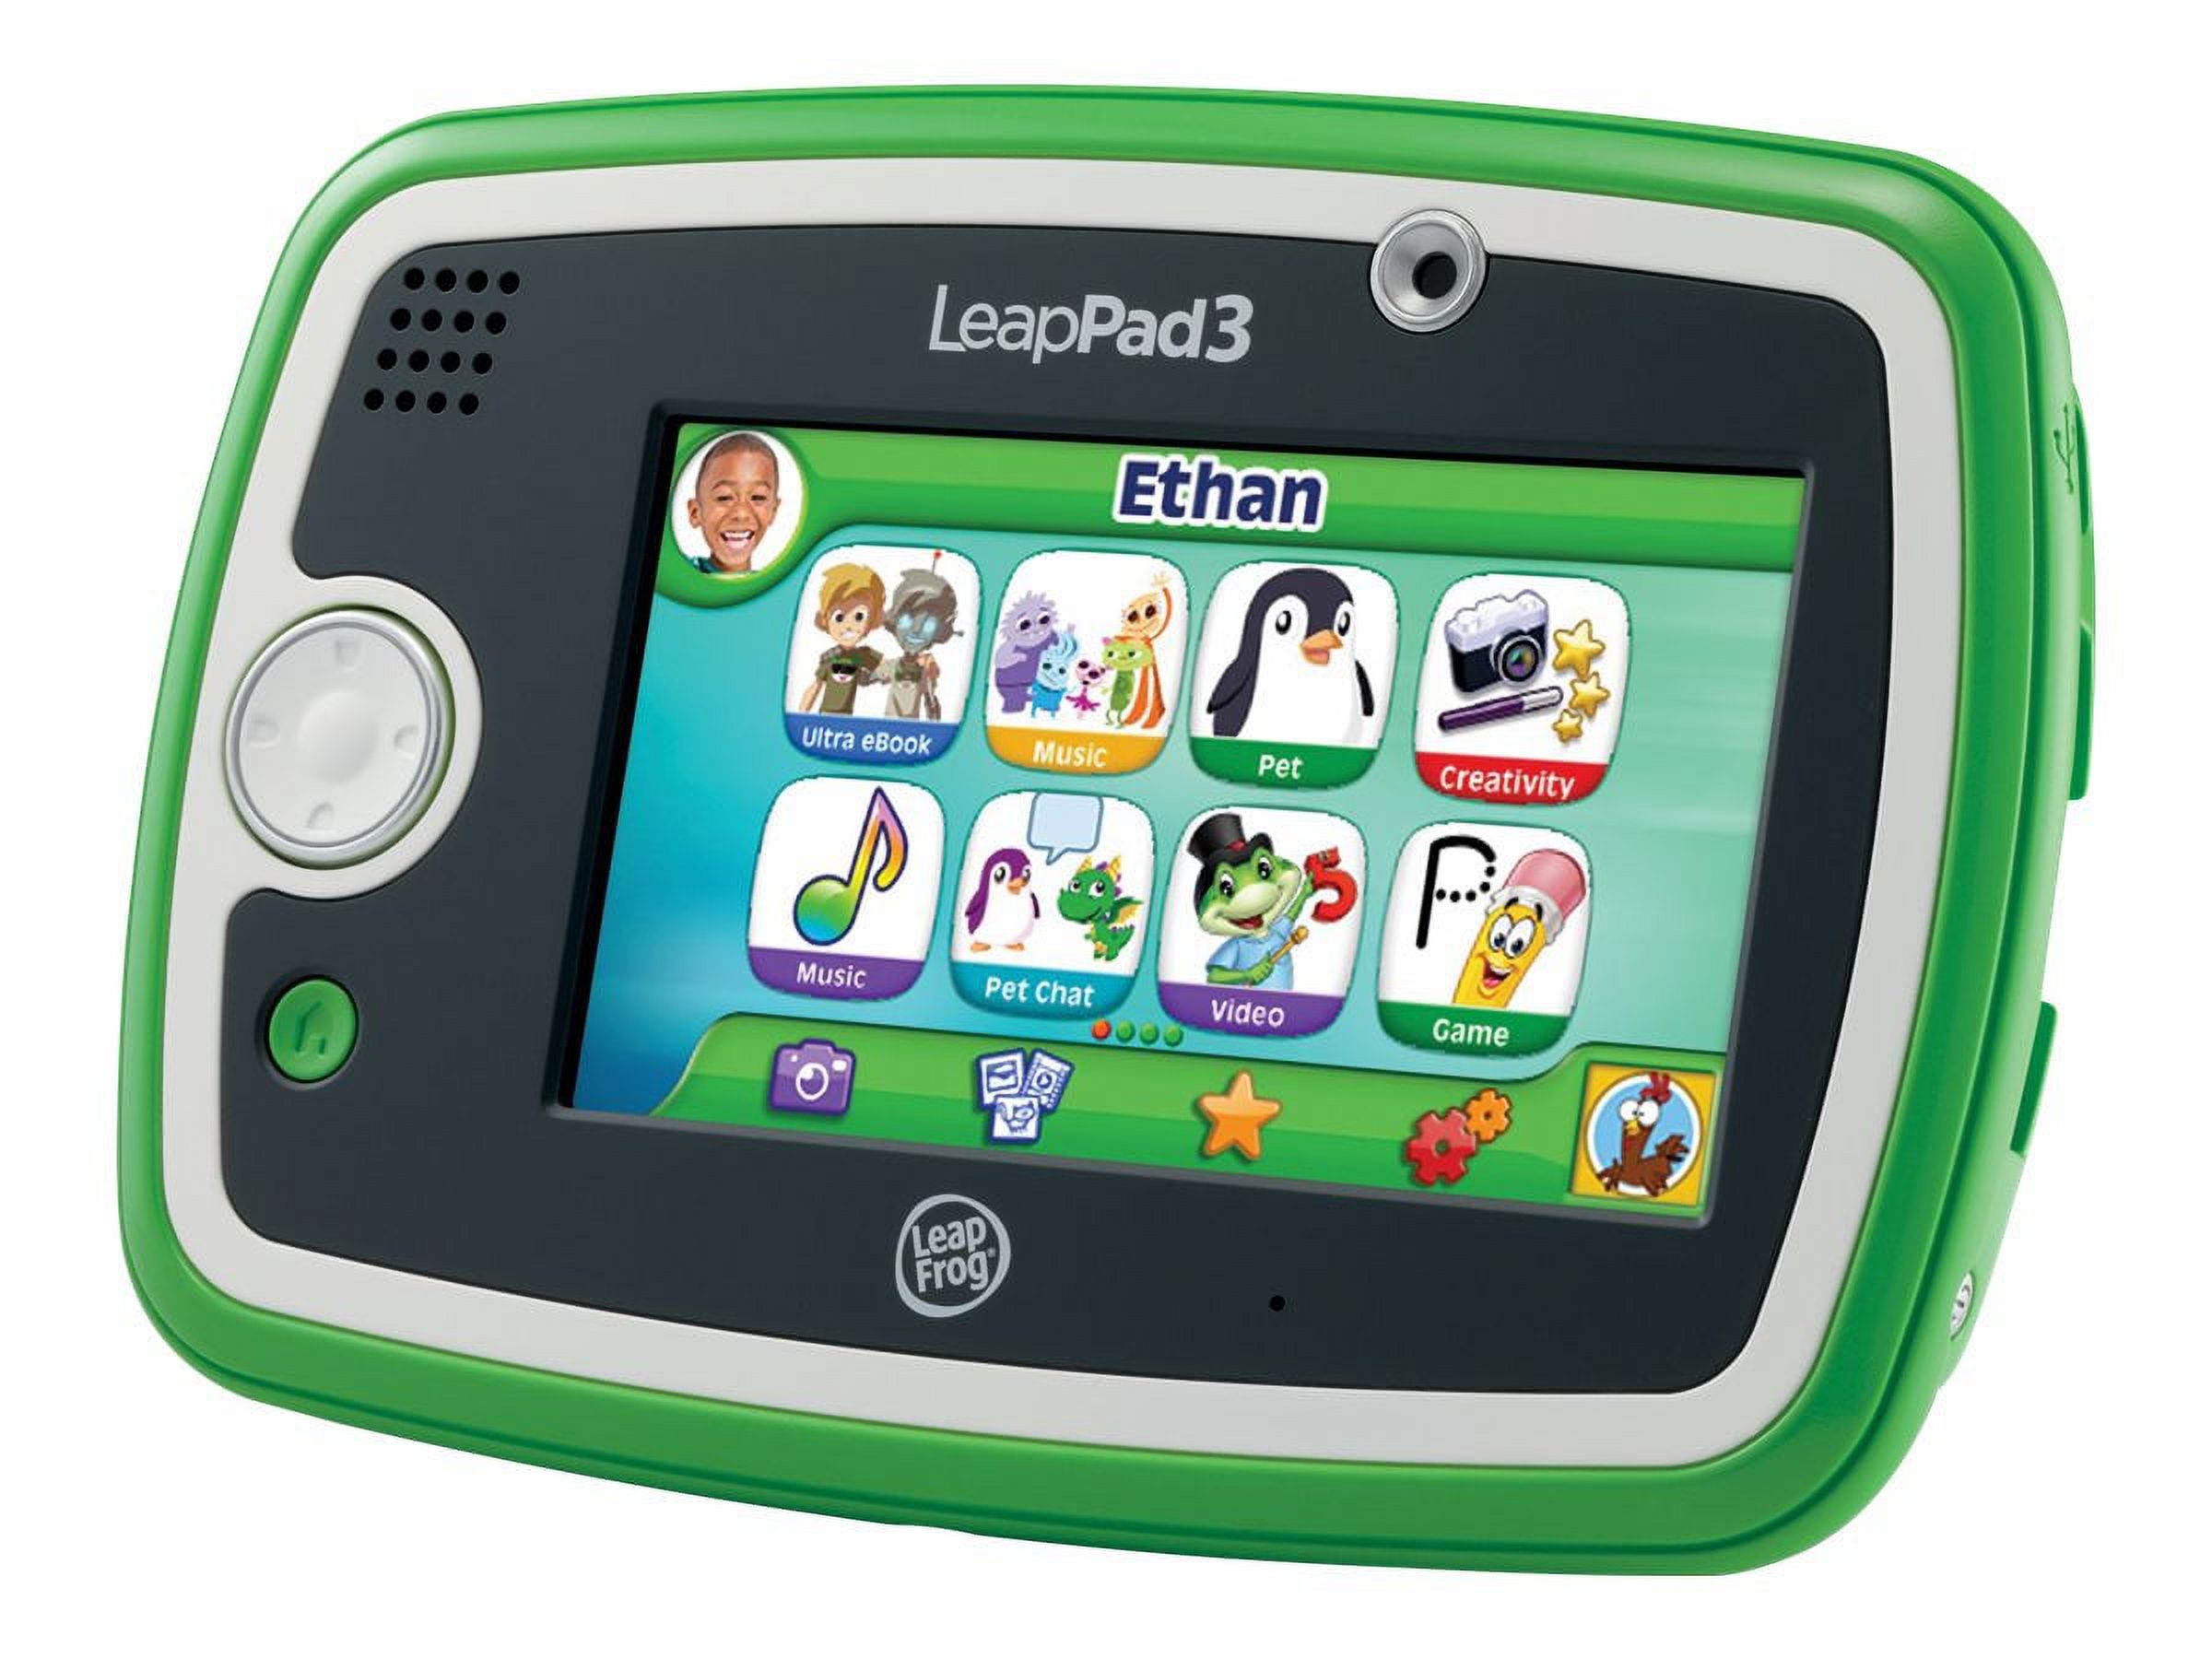 LeapFrog LeapPad3 Kids' Learning Tablet with Wi-Fi, Green or Pink - image 2 of 10